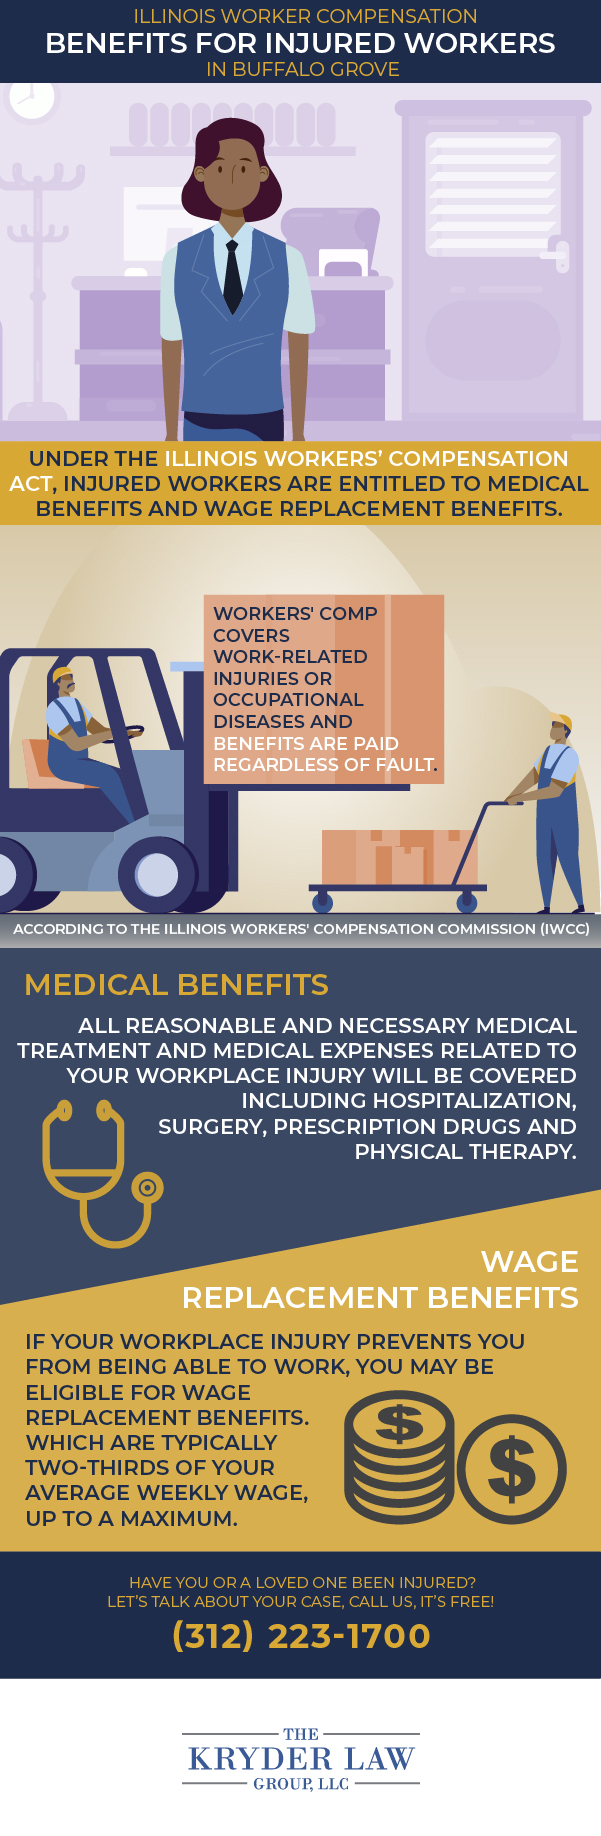 The Benefits of Hiring a Buffalo Grove Workers’ Compensation Lawyer Infographic